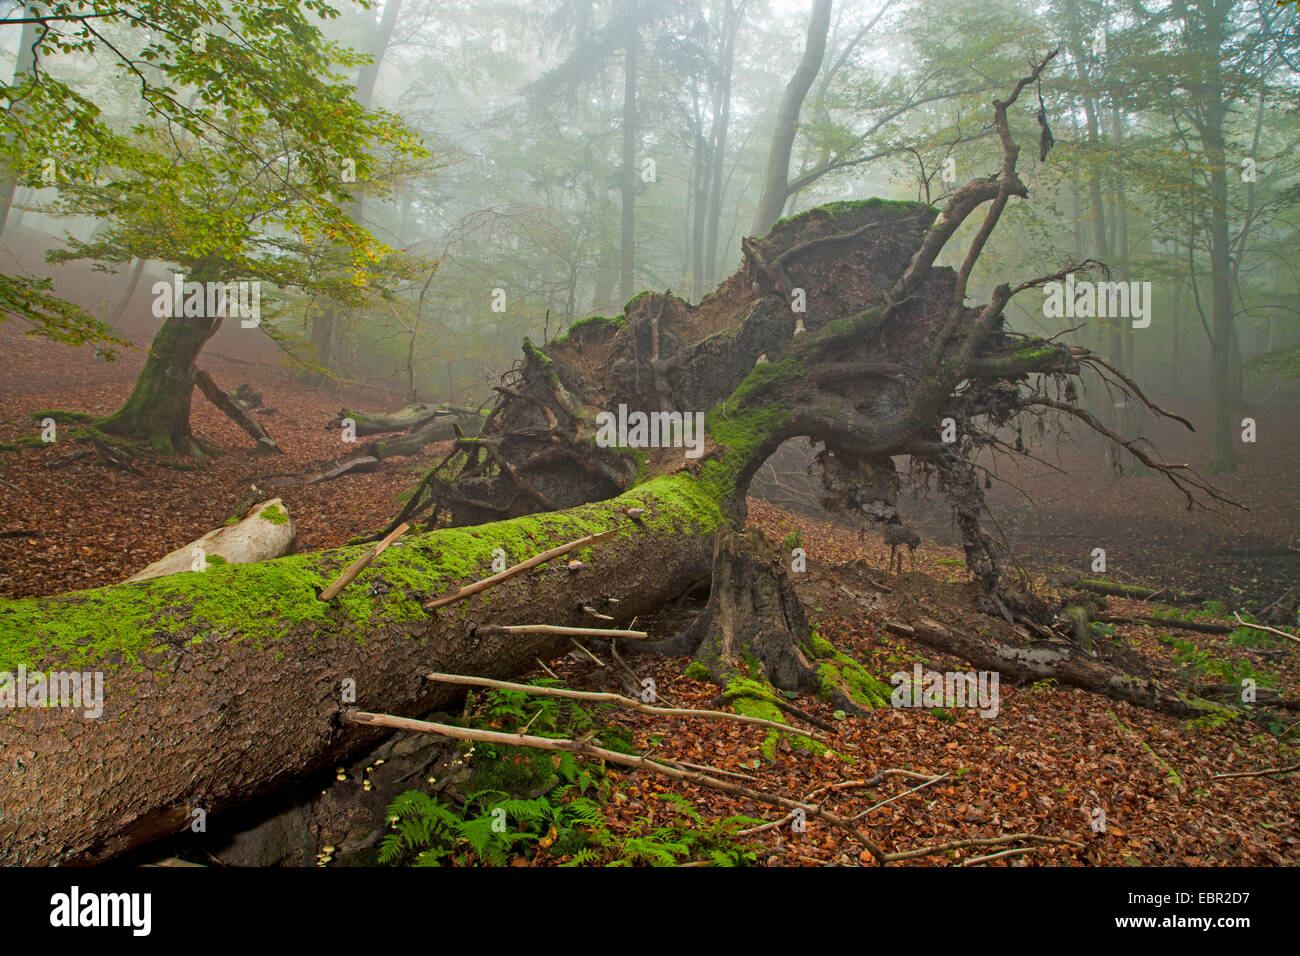 common beech (Fagus sylvatica), uprooted tree, Germany, Hesse, Kellerwald National Park Stock Photo